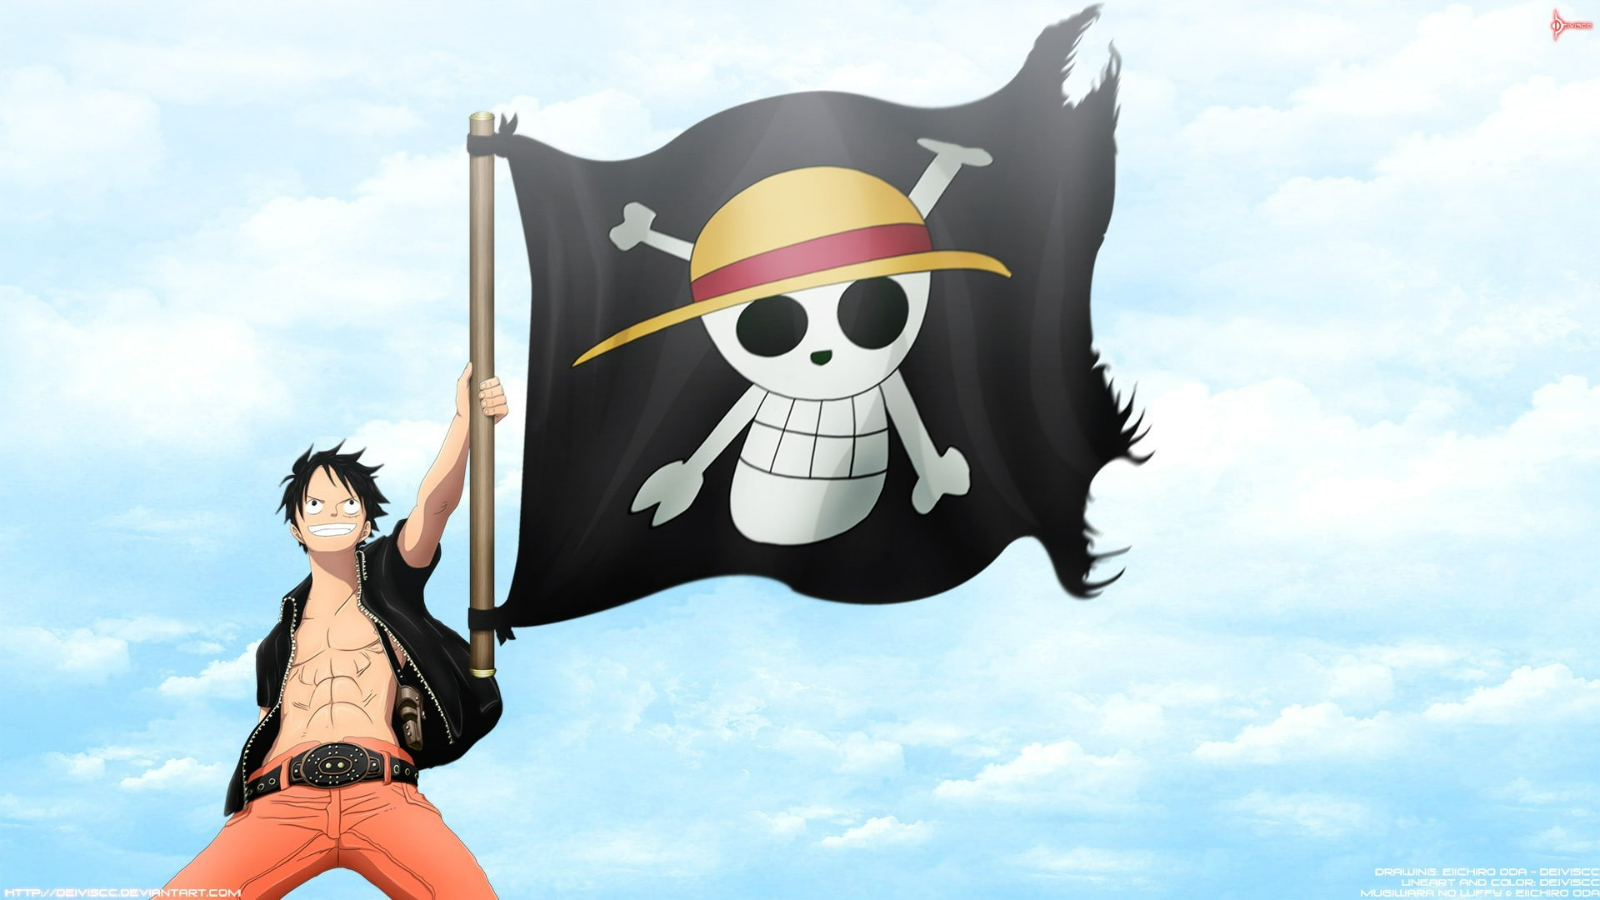 One Piece movies: when to watch them to keep up with the plot